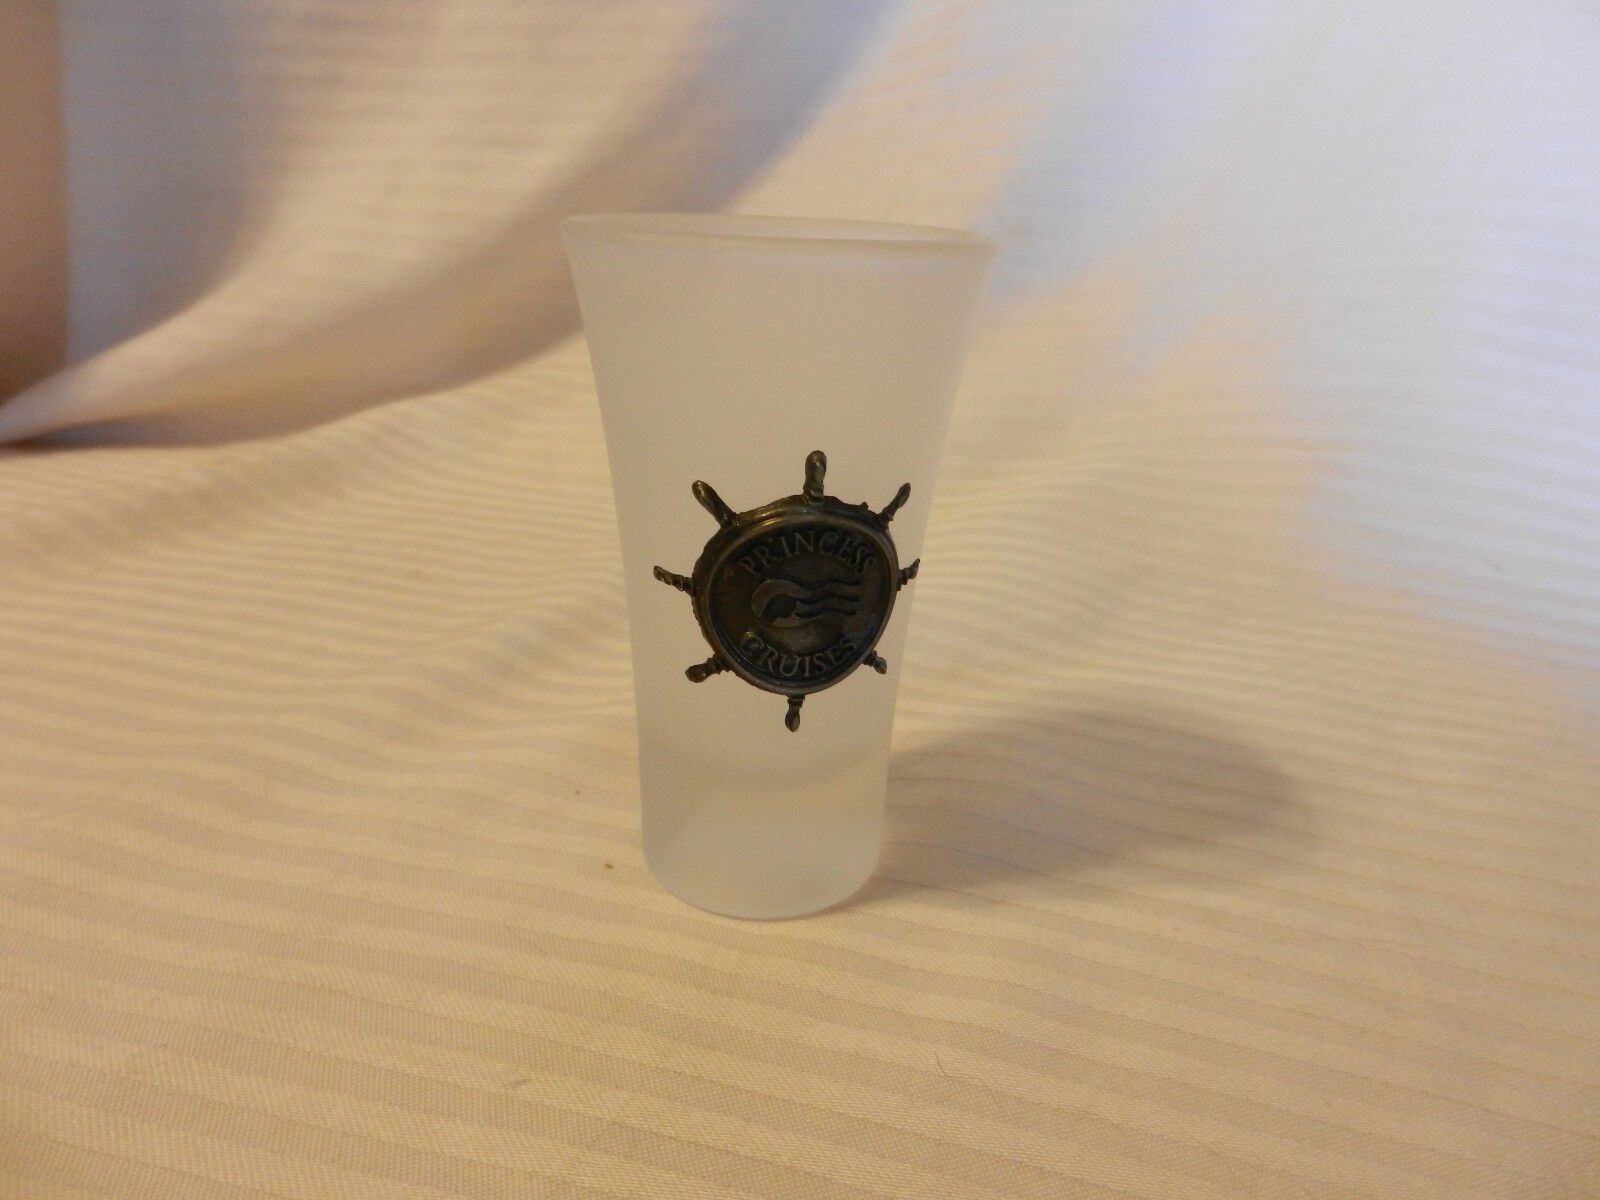 Primary image for Princess Cruises Cruise Line Raised Metal Logo Frosted Shooter Glass 3.5" Tall 